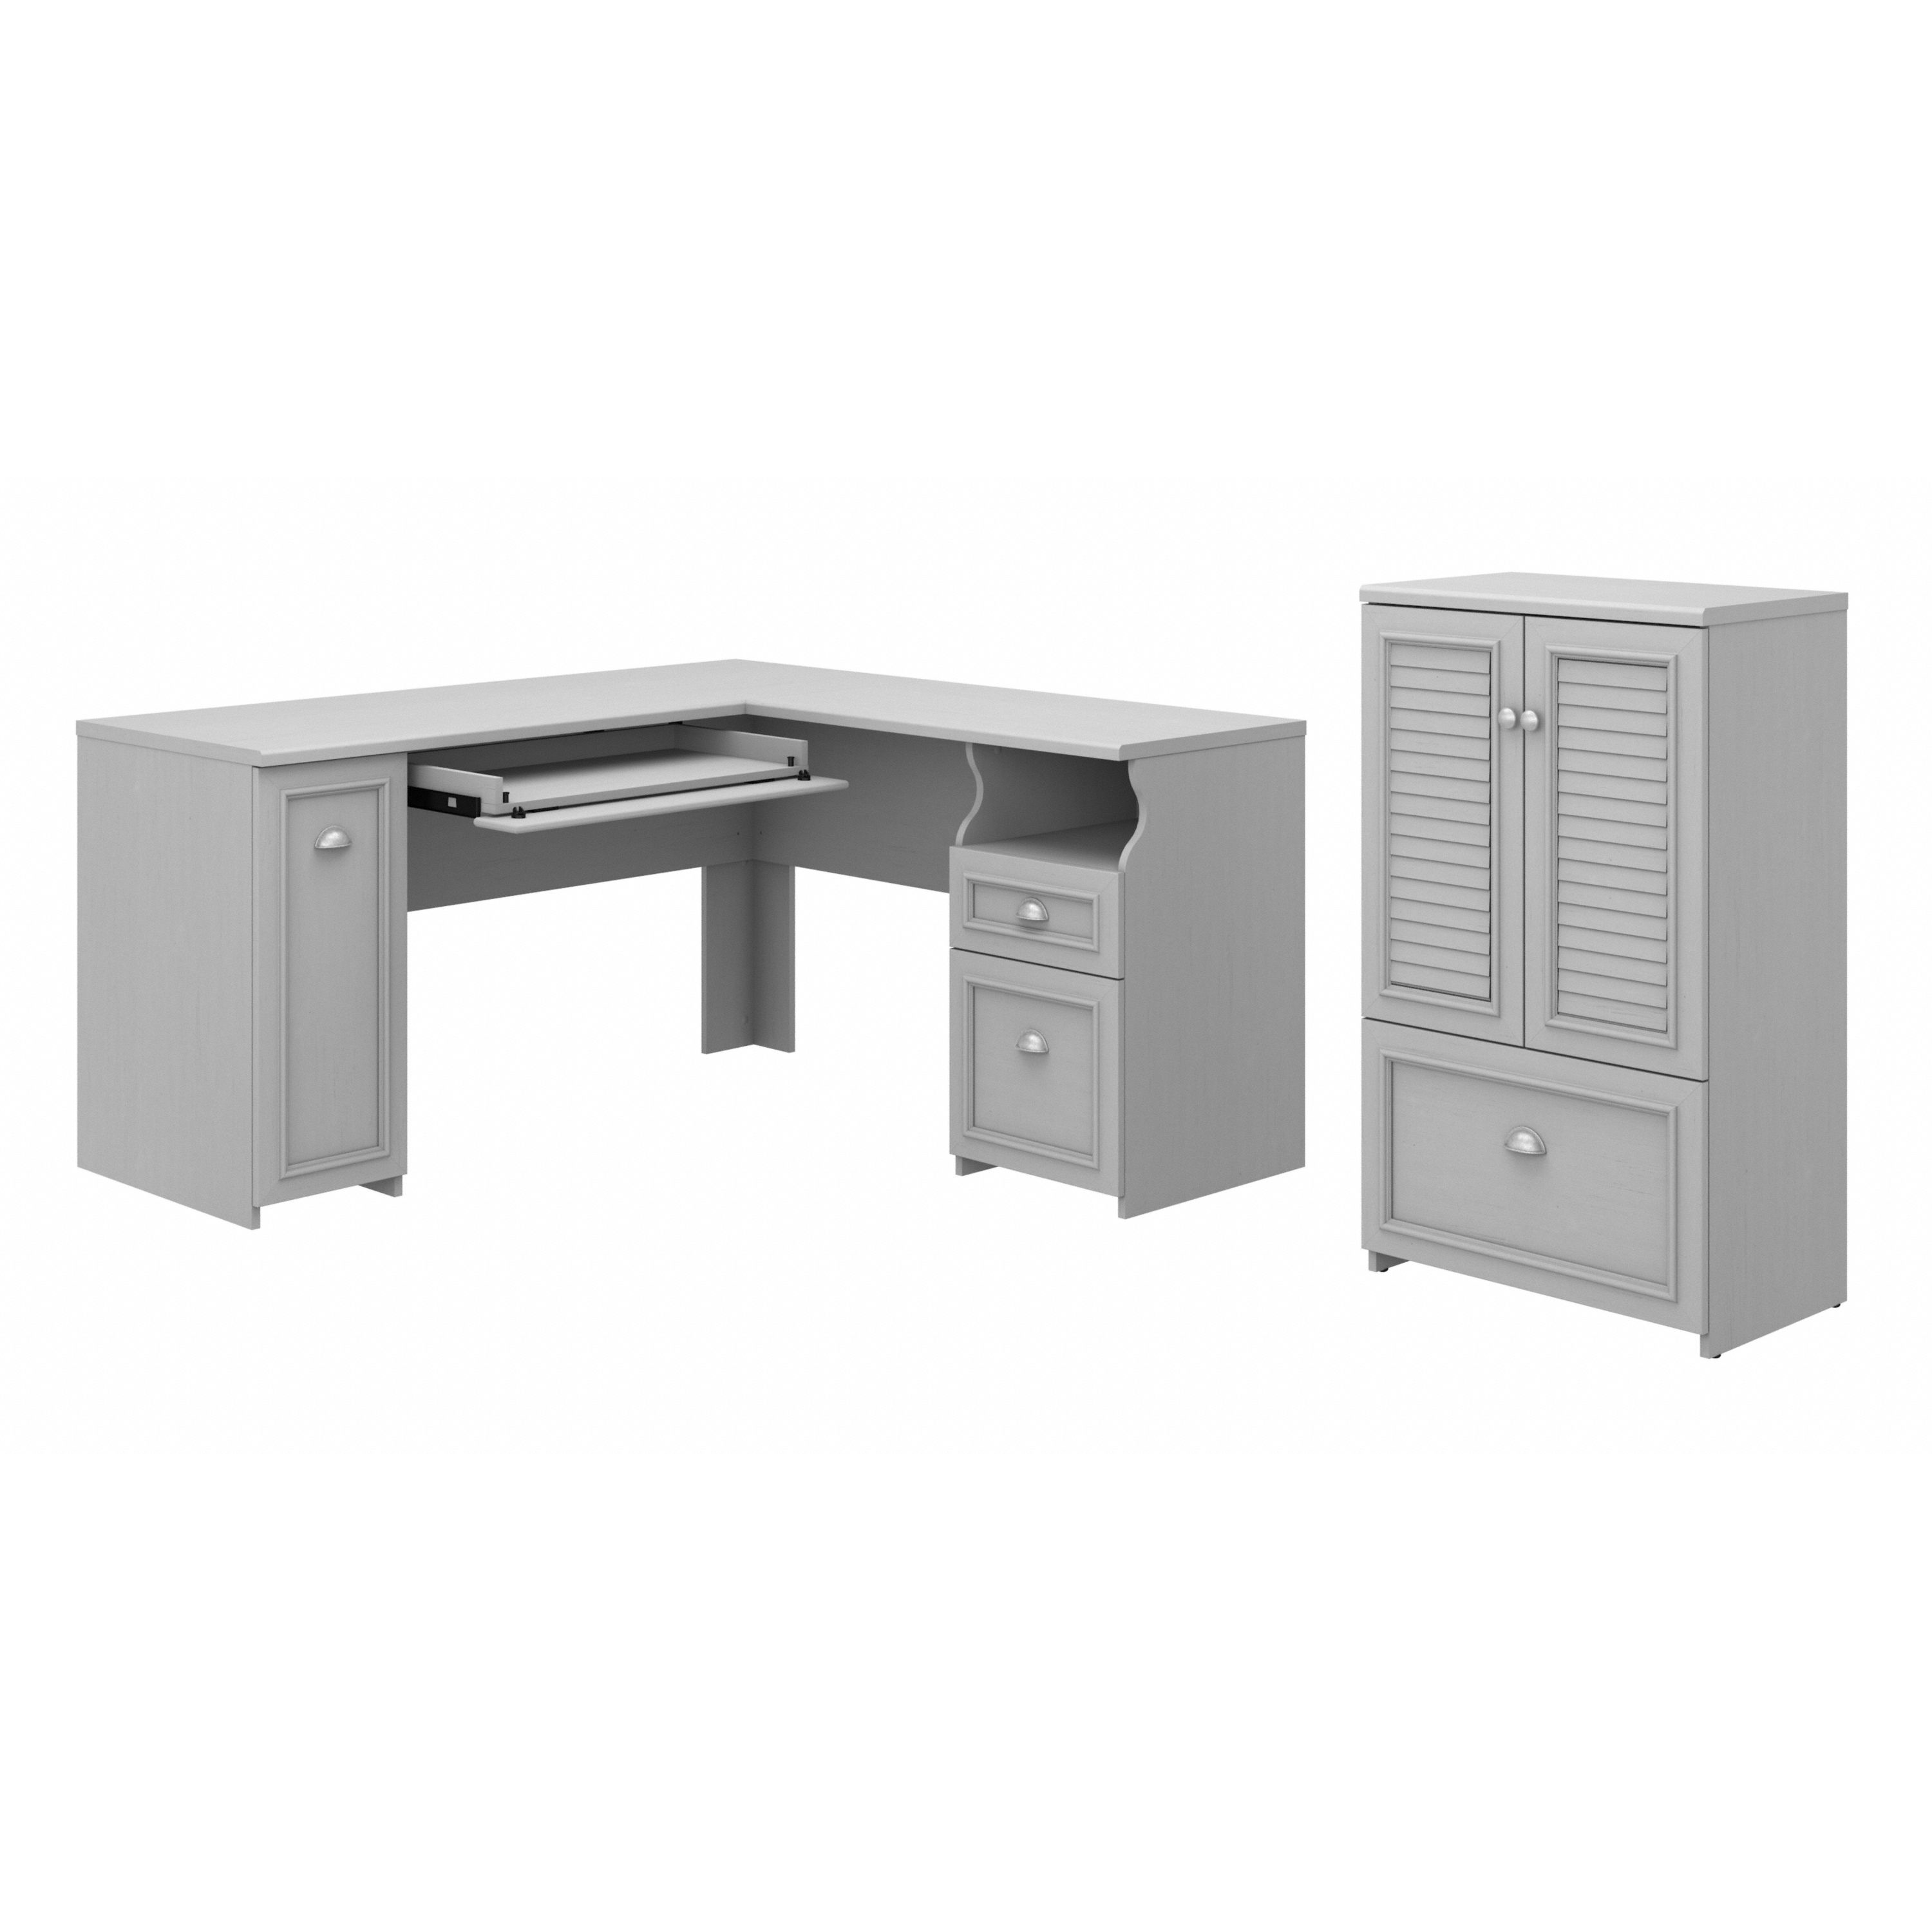 Shop Bush Furniture Fairview 60W L Shaped Desk and 2 Door Storage Cabinet with File Drawer 02 FV009CG #color_cape cod gray